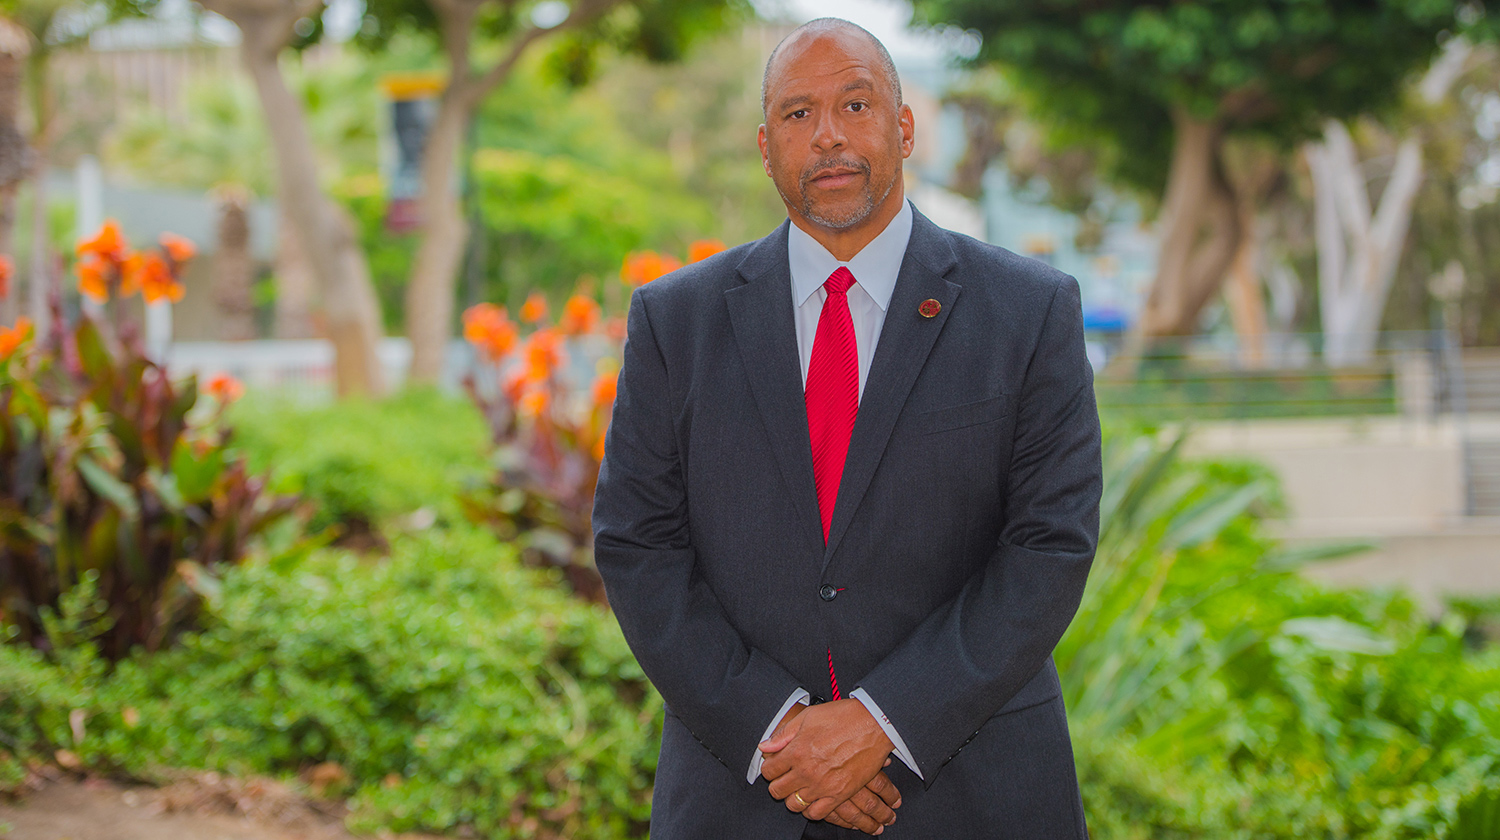 CSUDH President Thomas A. Parham has been elected to serve on the executive committee of the Coalition of Urban and Metropolitan Universities.